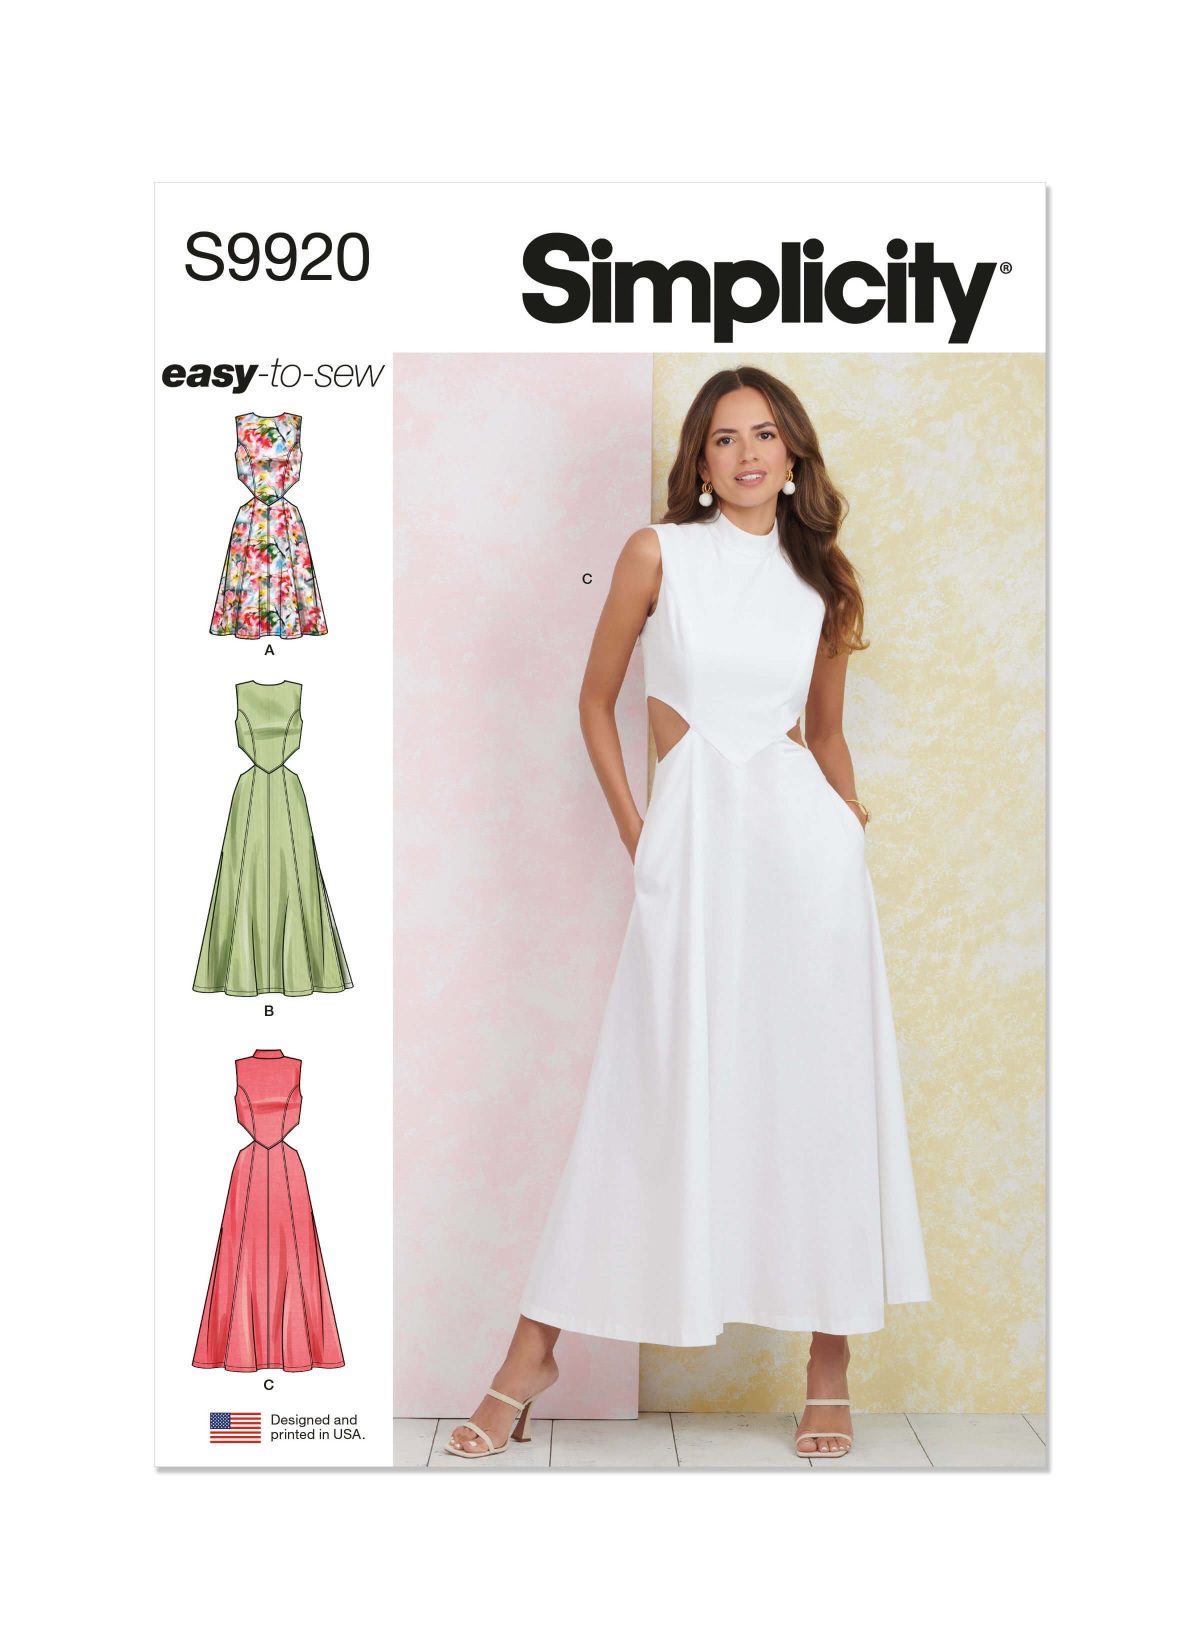 Simplicity Sewing Pattern S9920 Misses' Dress with Neckline and Length  Variations - Sewdirect